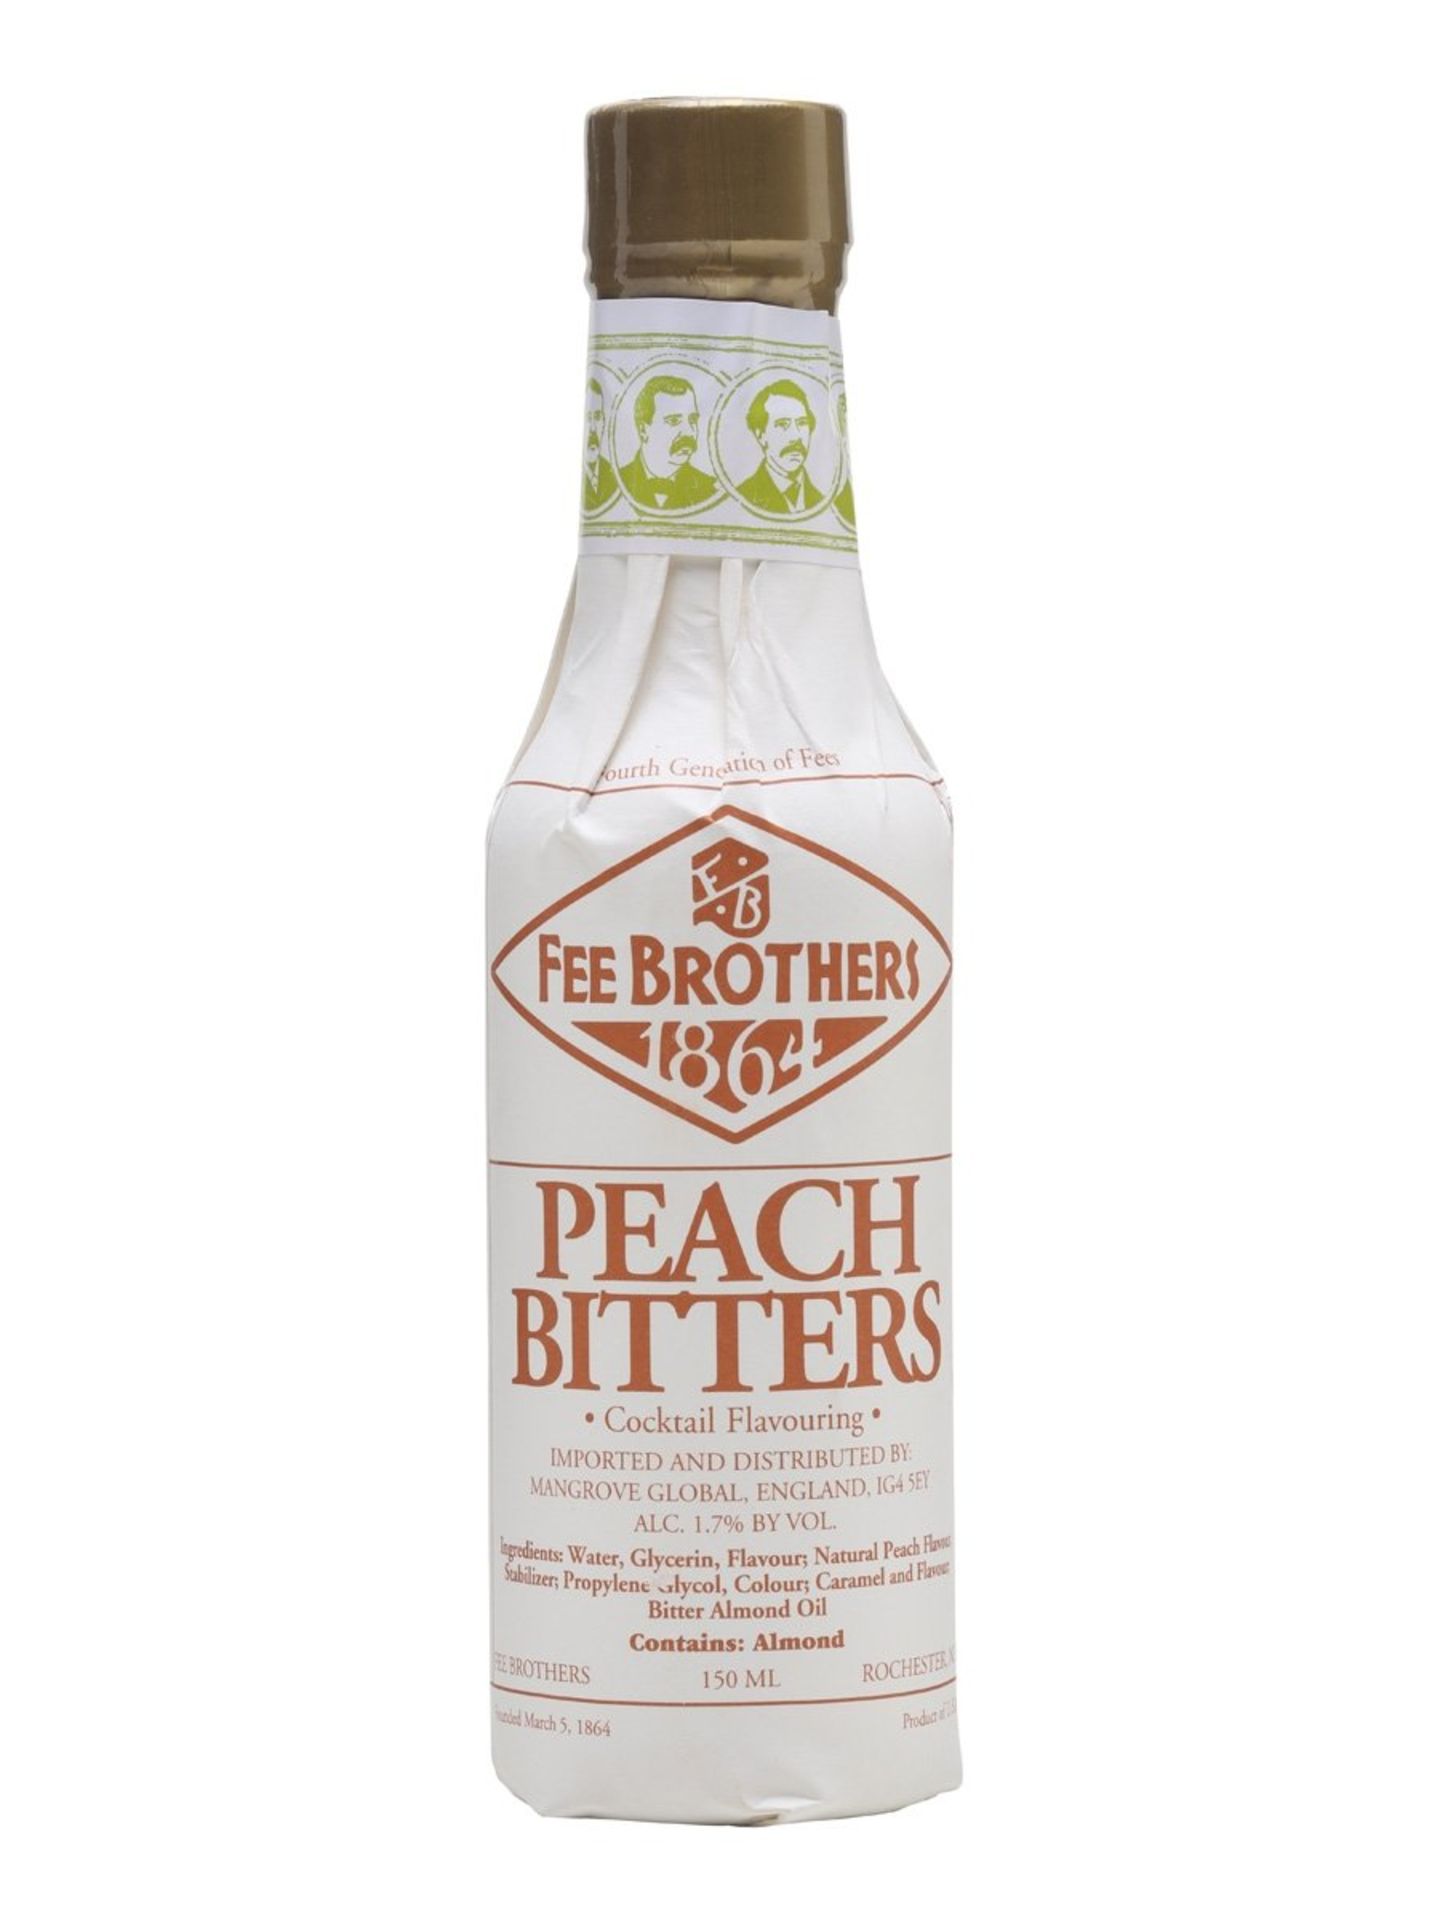 Fee Brothers 1864 Peach Bitters New York, USA 150ml ( Bid Is For 1x Bottle Option To Purchase More)